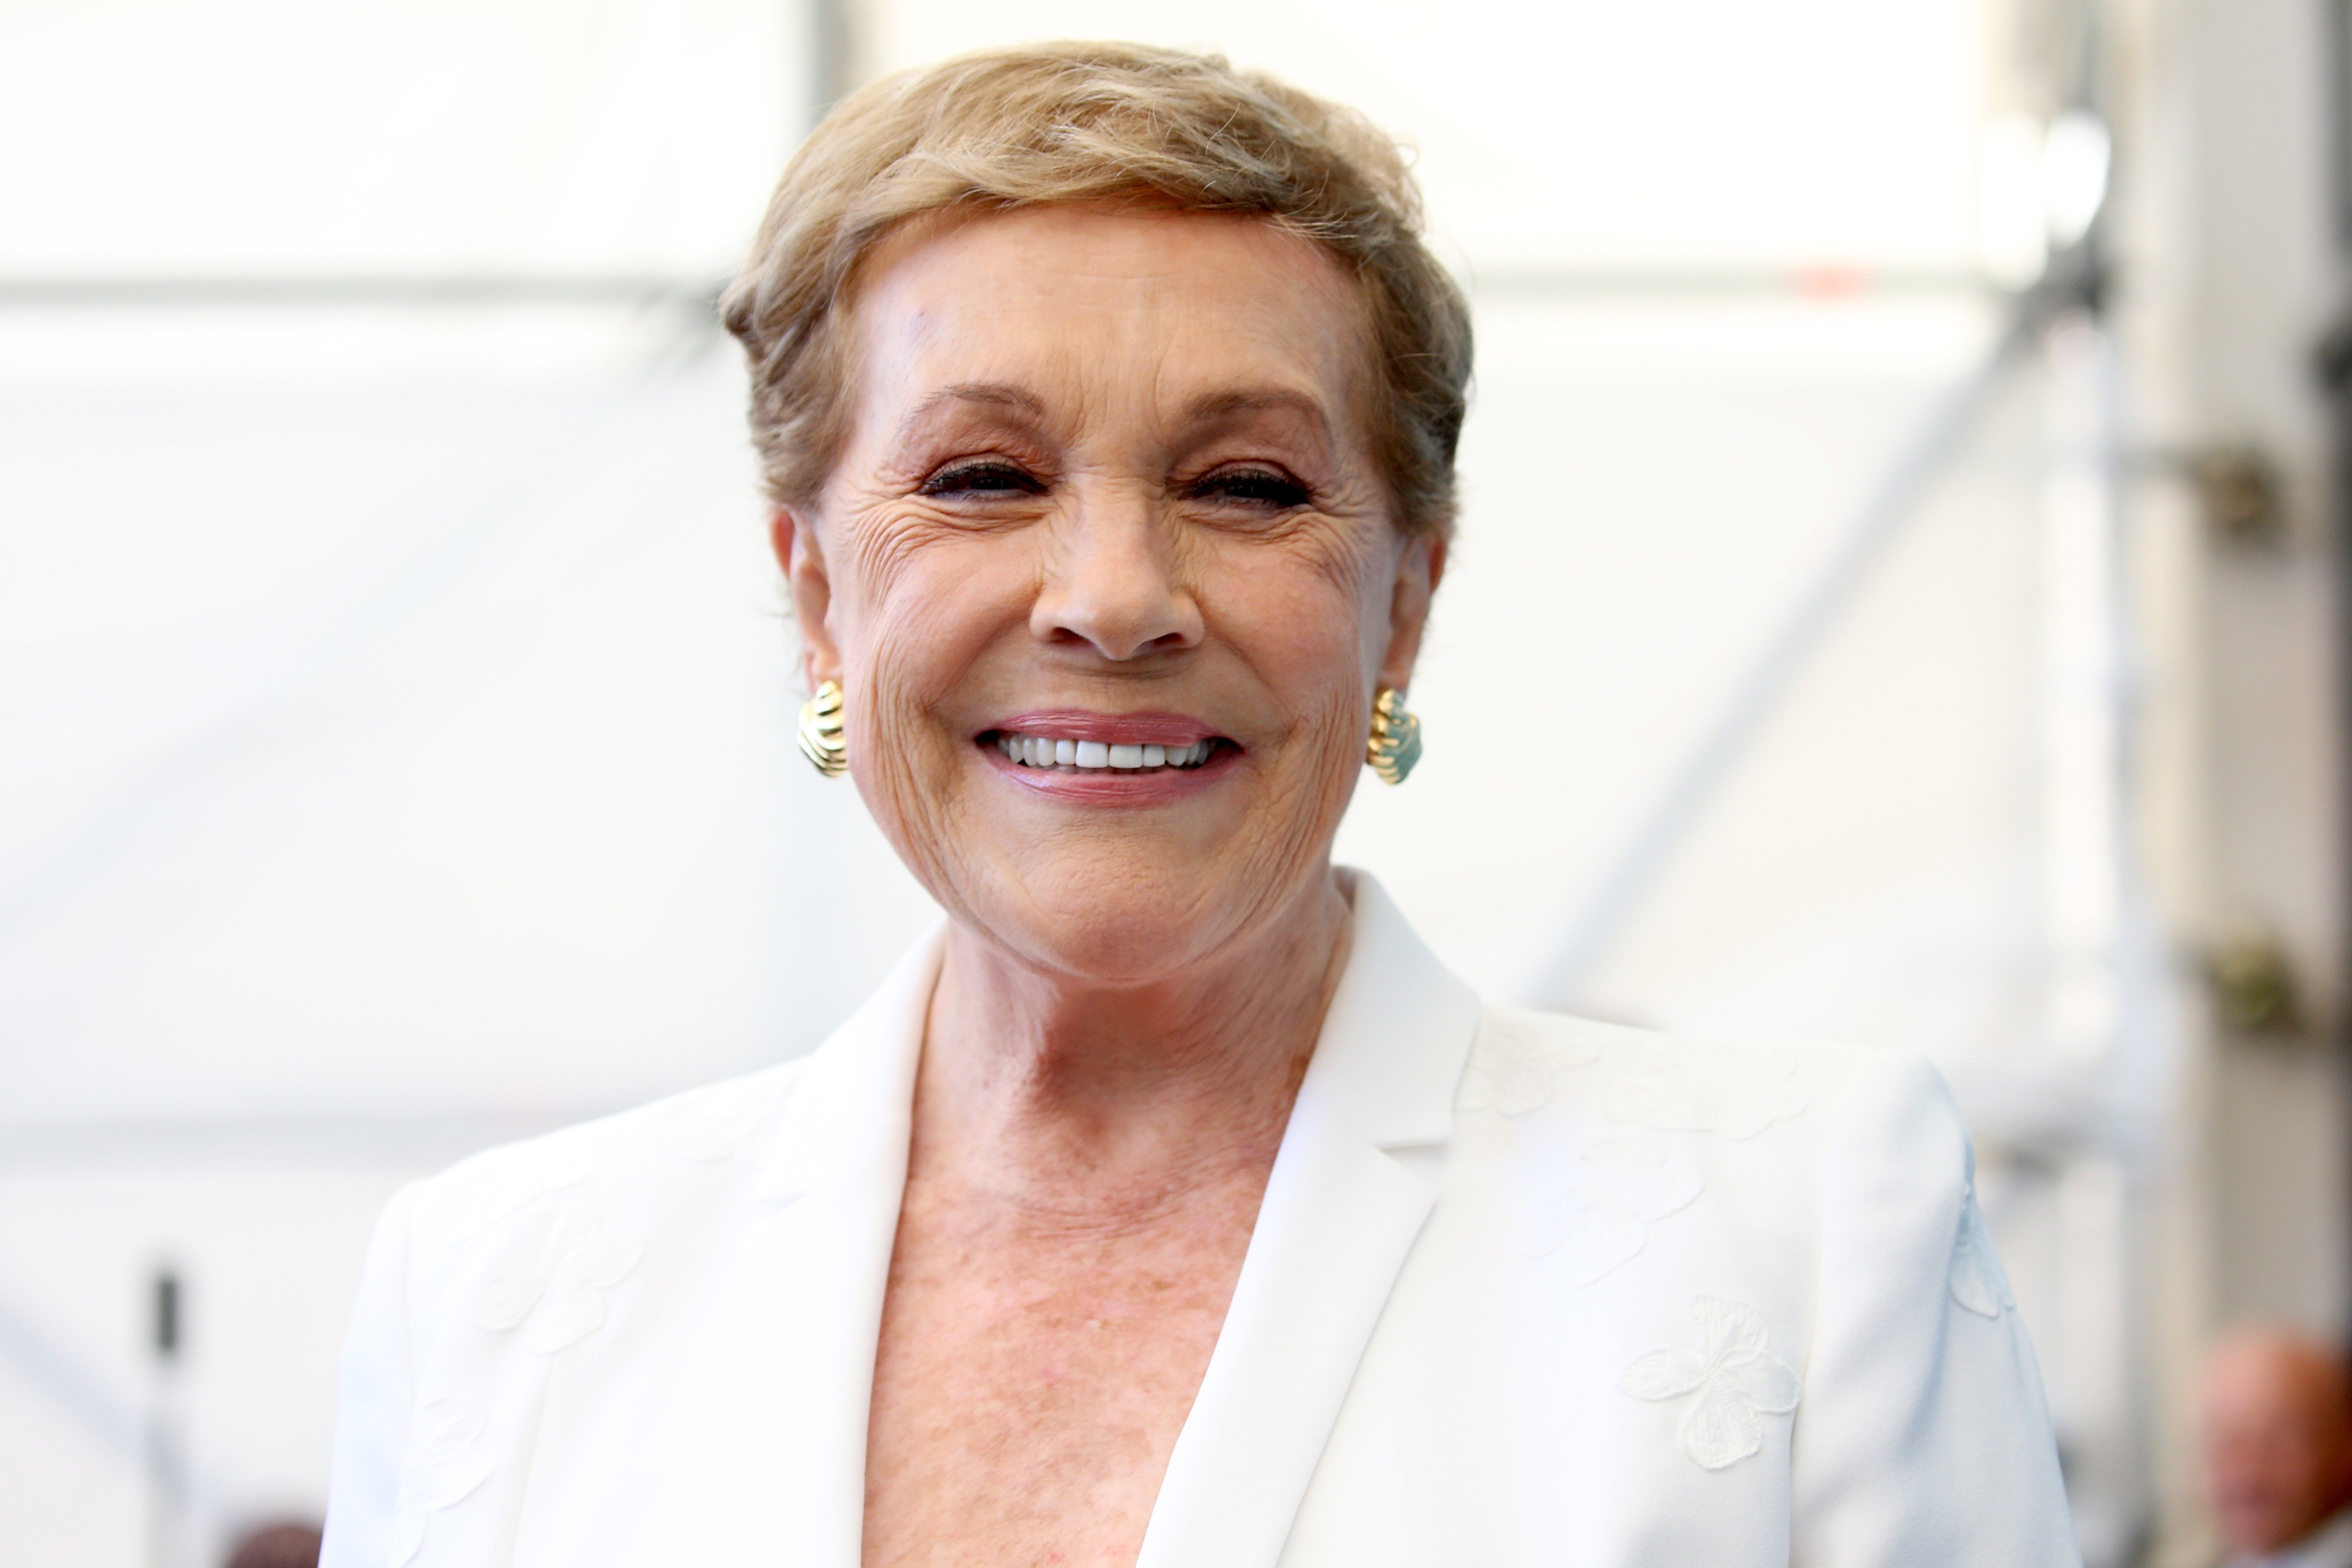 Julie Andrews attends the Venice Film Festival in Italy on September 3, 2019 | Photo: Getty images